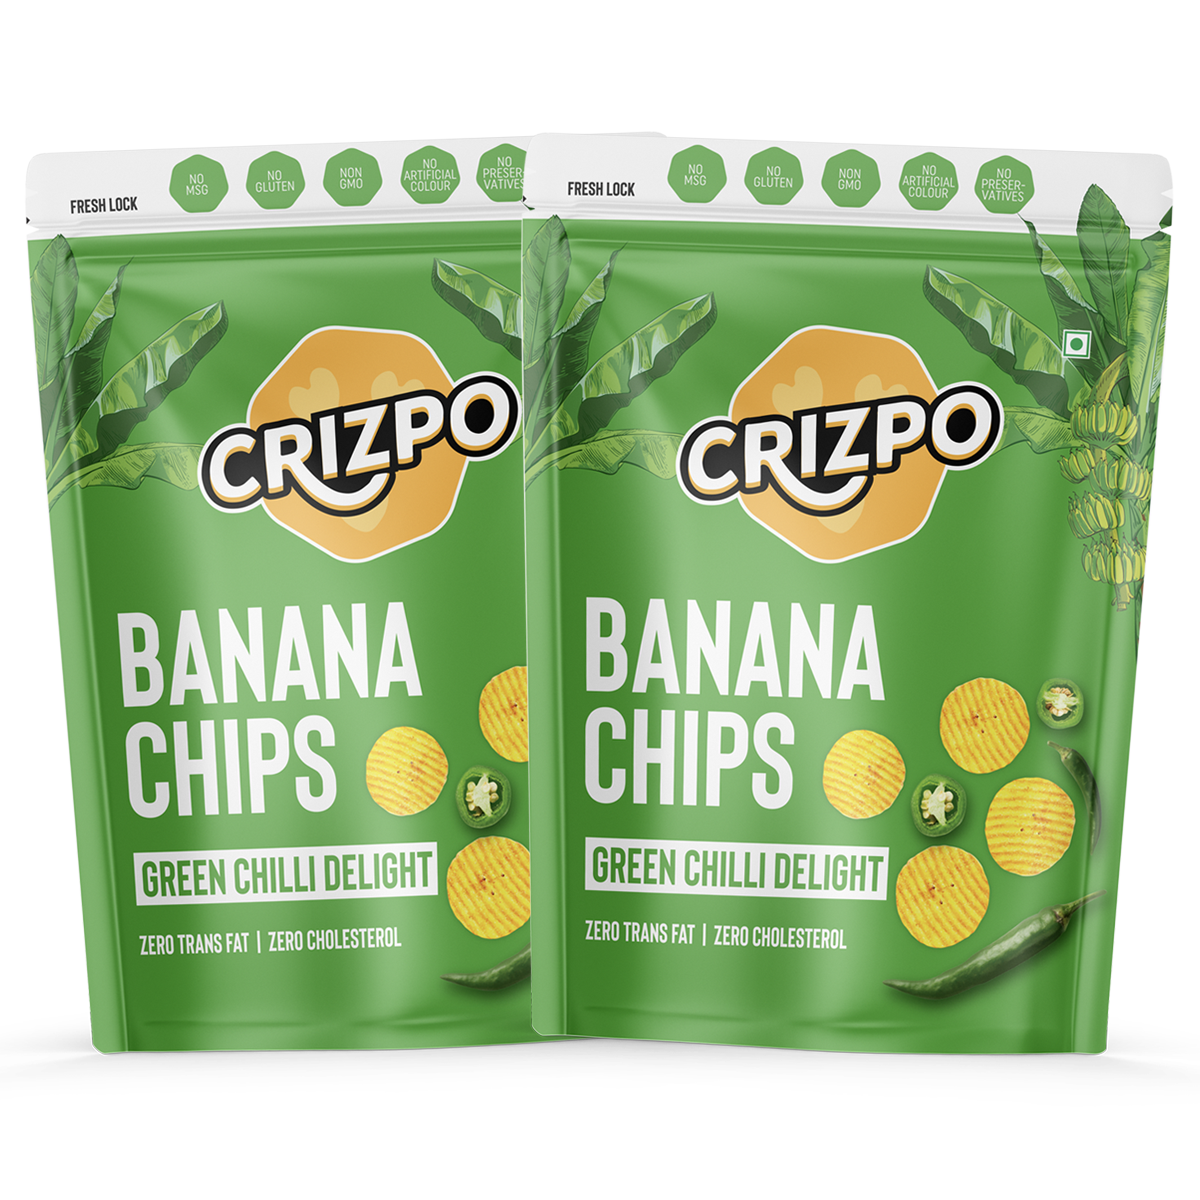 Crizpo Banana Chips - Green Chilli Delight - Pack of 2 x 110g